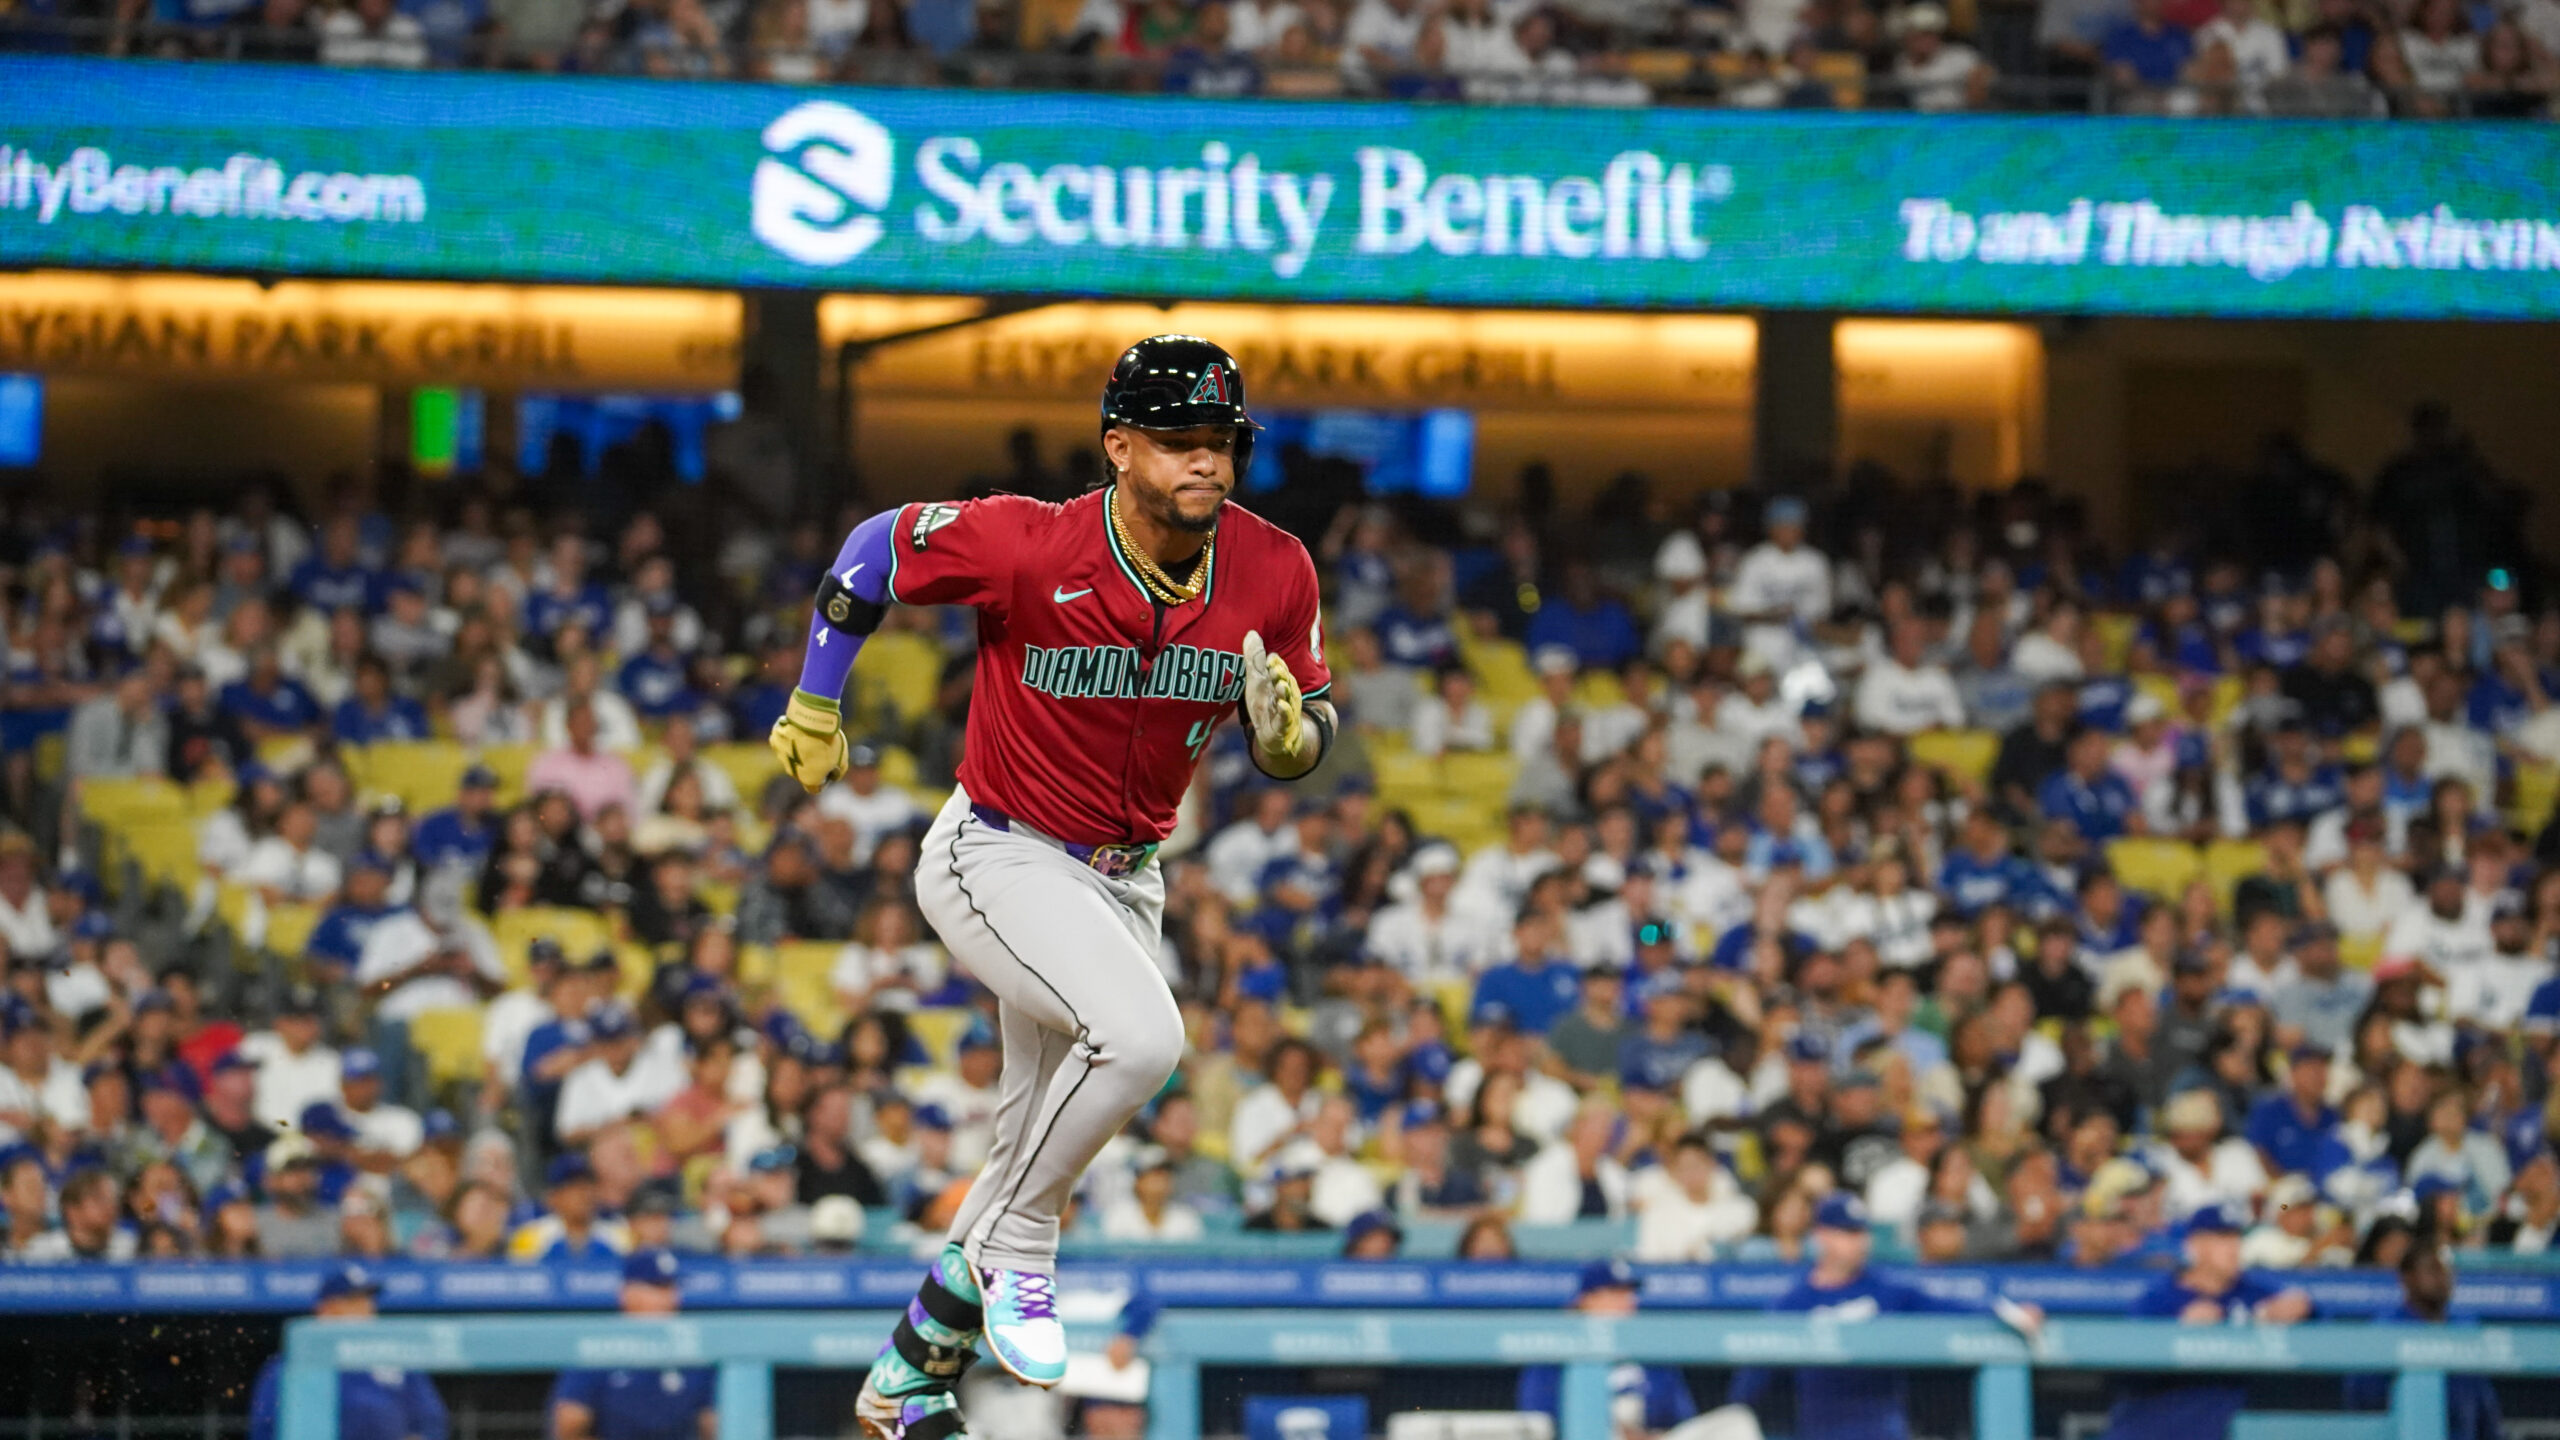 Ketel Marte sidelined as D-backs face Padres; Newman to take the field